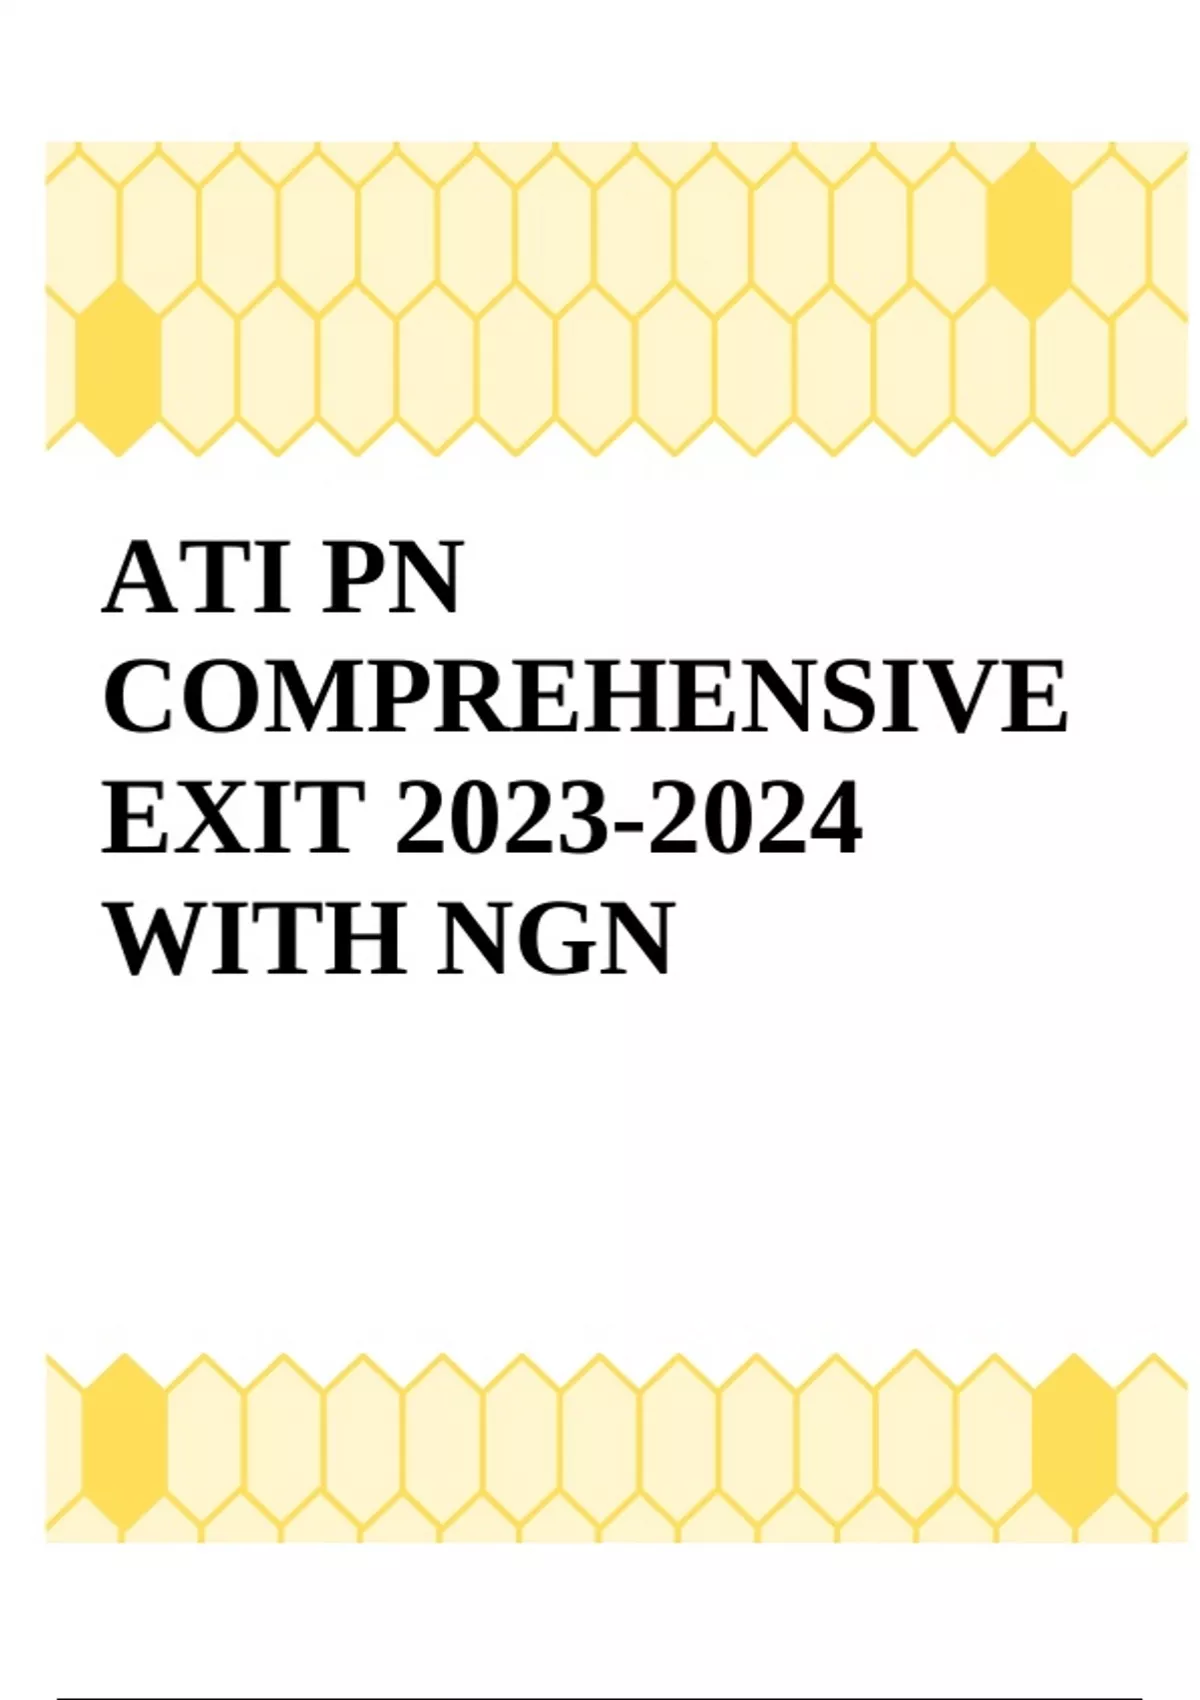 ATI PN COMPREHENSIVE EXIT 20232024 WITH NGN (UPGRADED) ATI PN